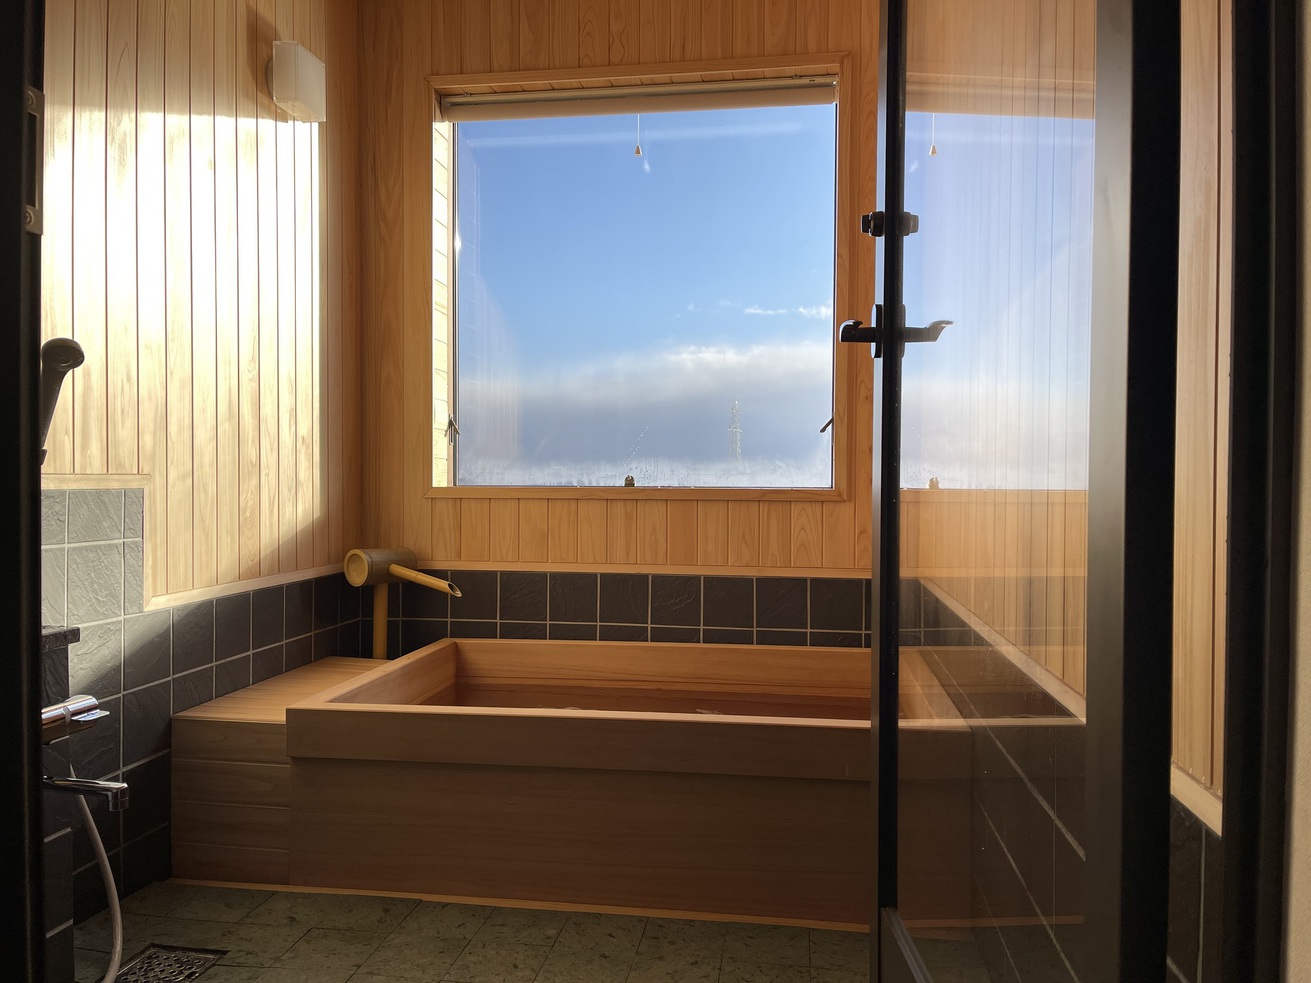 Healing Inn White Pension Ideally located in the Inawashiro area, Healing Inn White Pension promises a relaxing and wonderful visit. The property has everything you need for a comfortable stay. Free Wi-Fi in all rooms are just